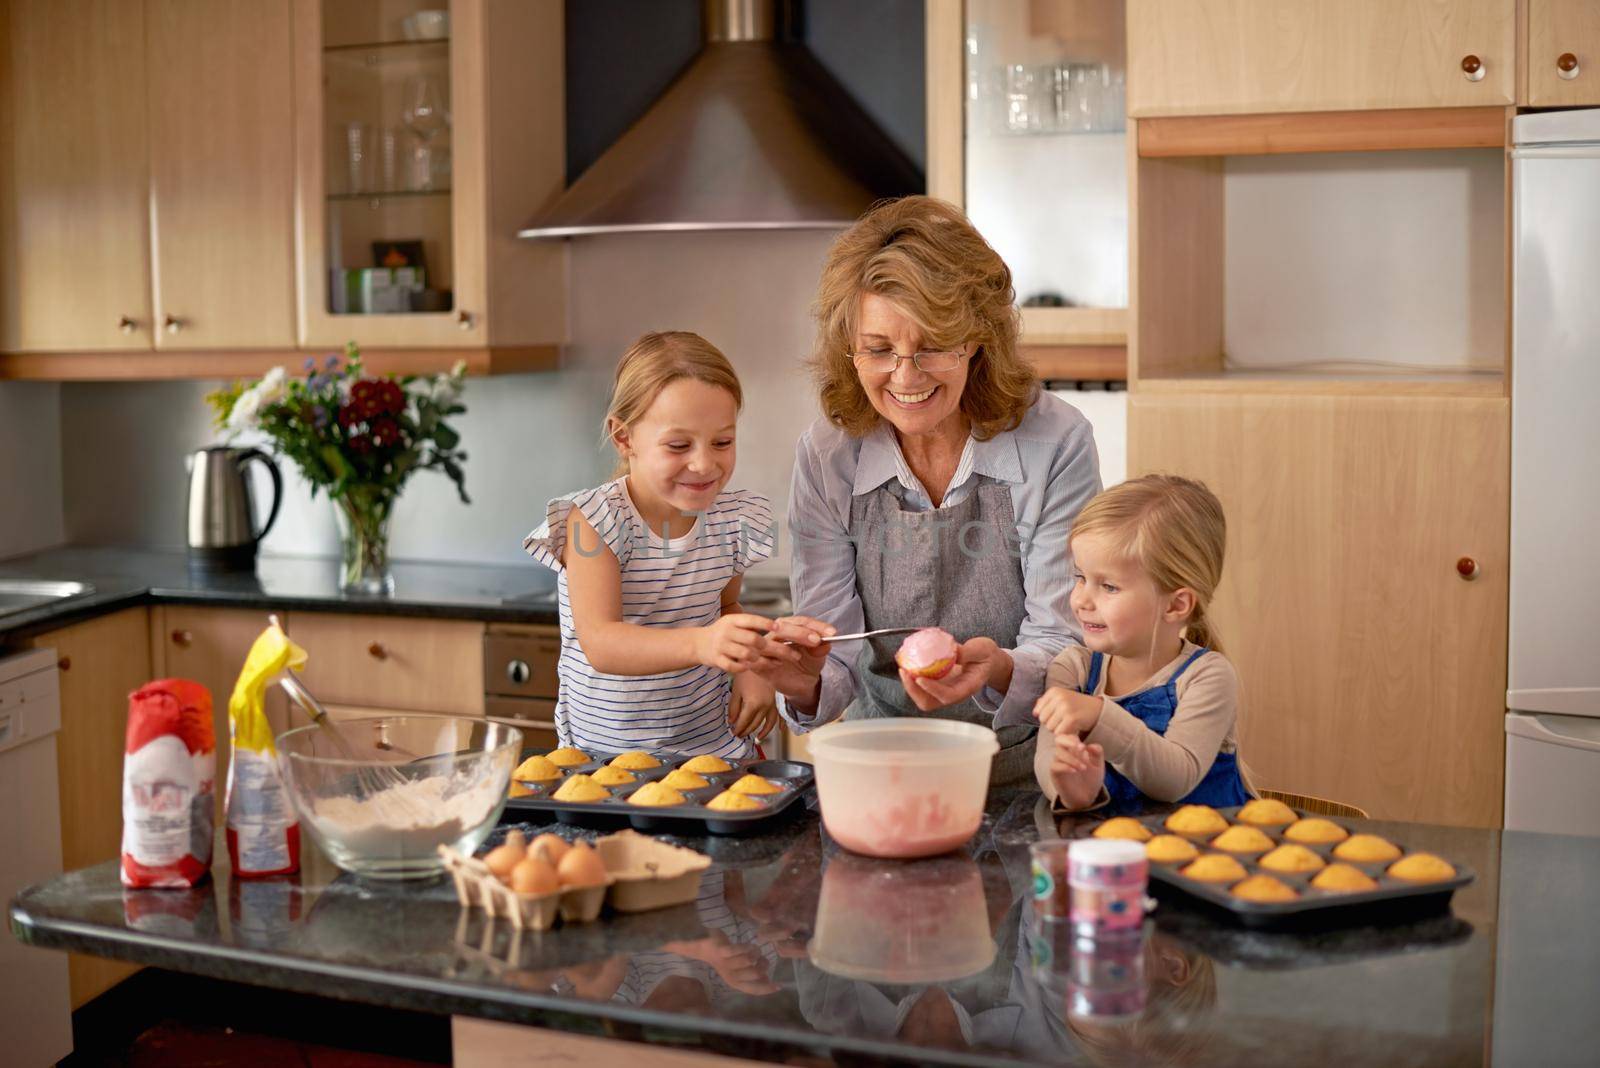 Two little girls baking cupcakes with the help of their grandmother at home.